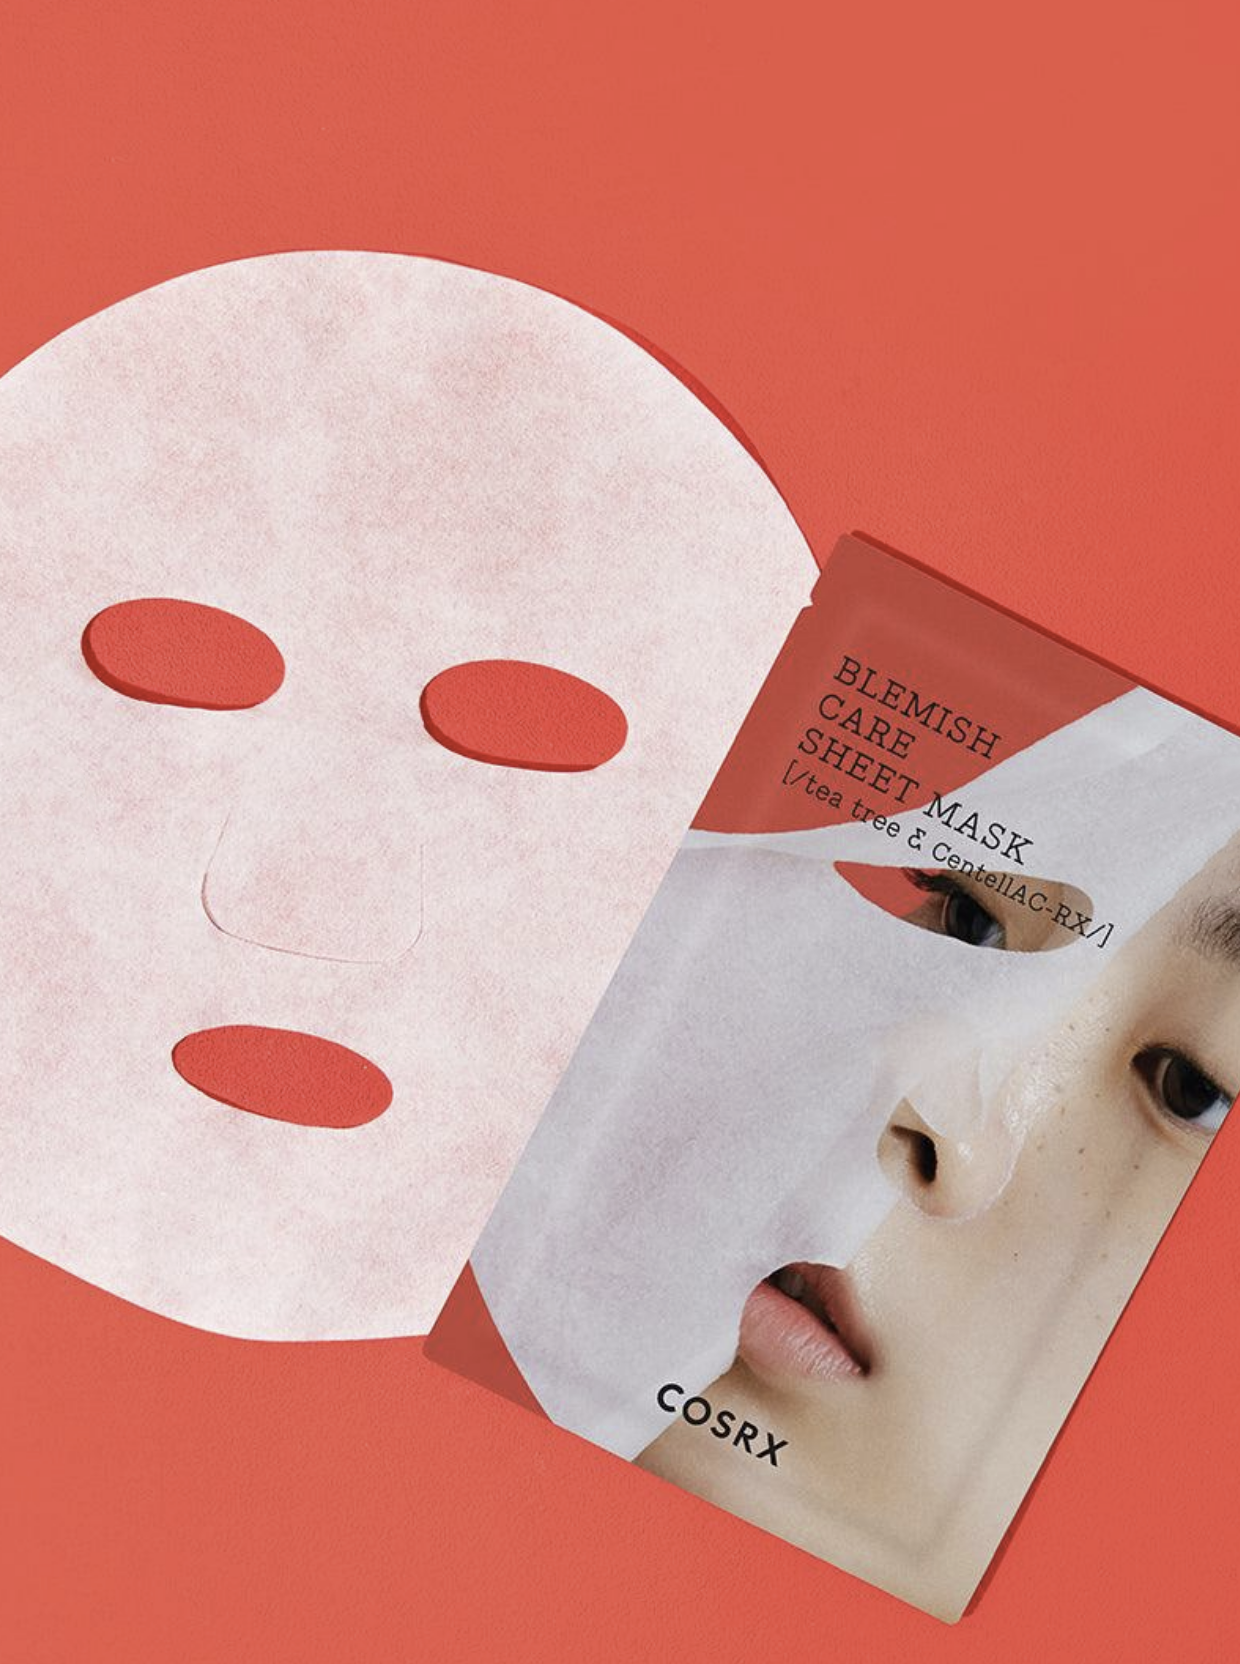 COSRX	AC Collection Blemish Care Mask Sheet